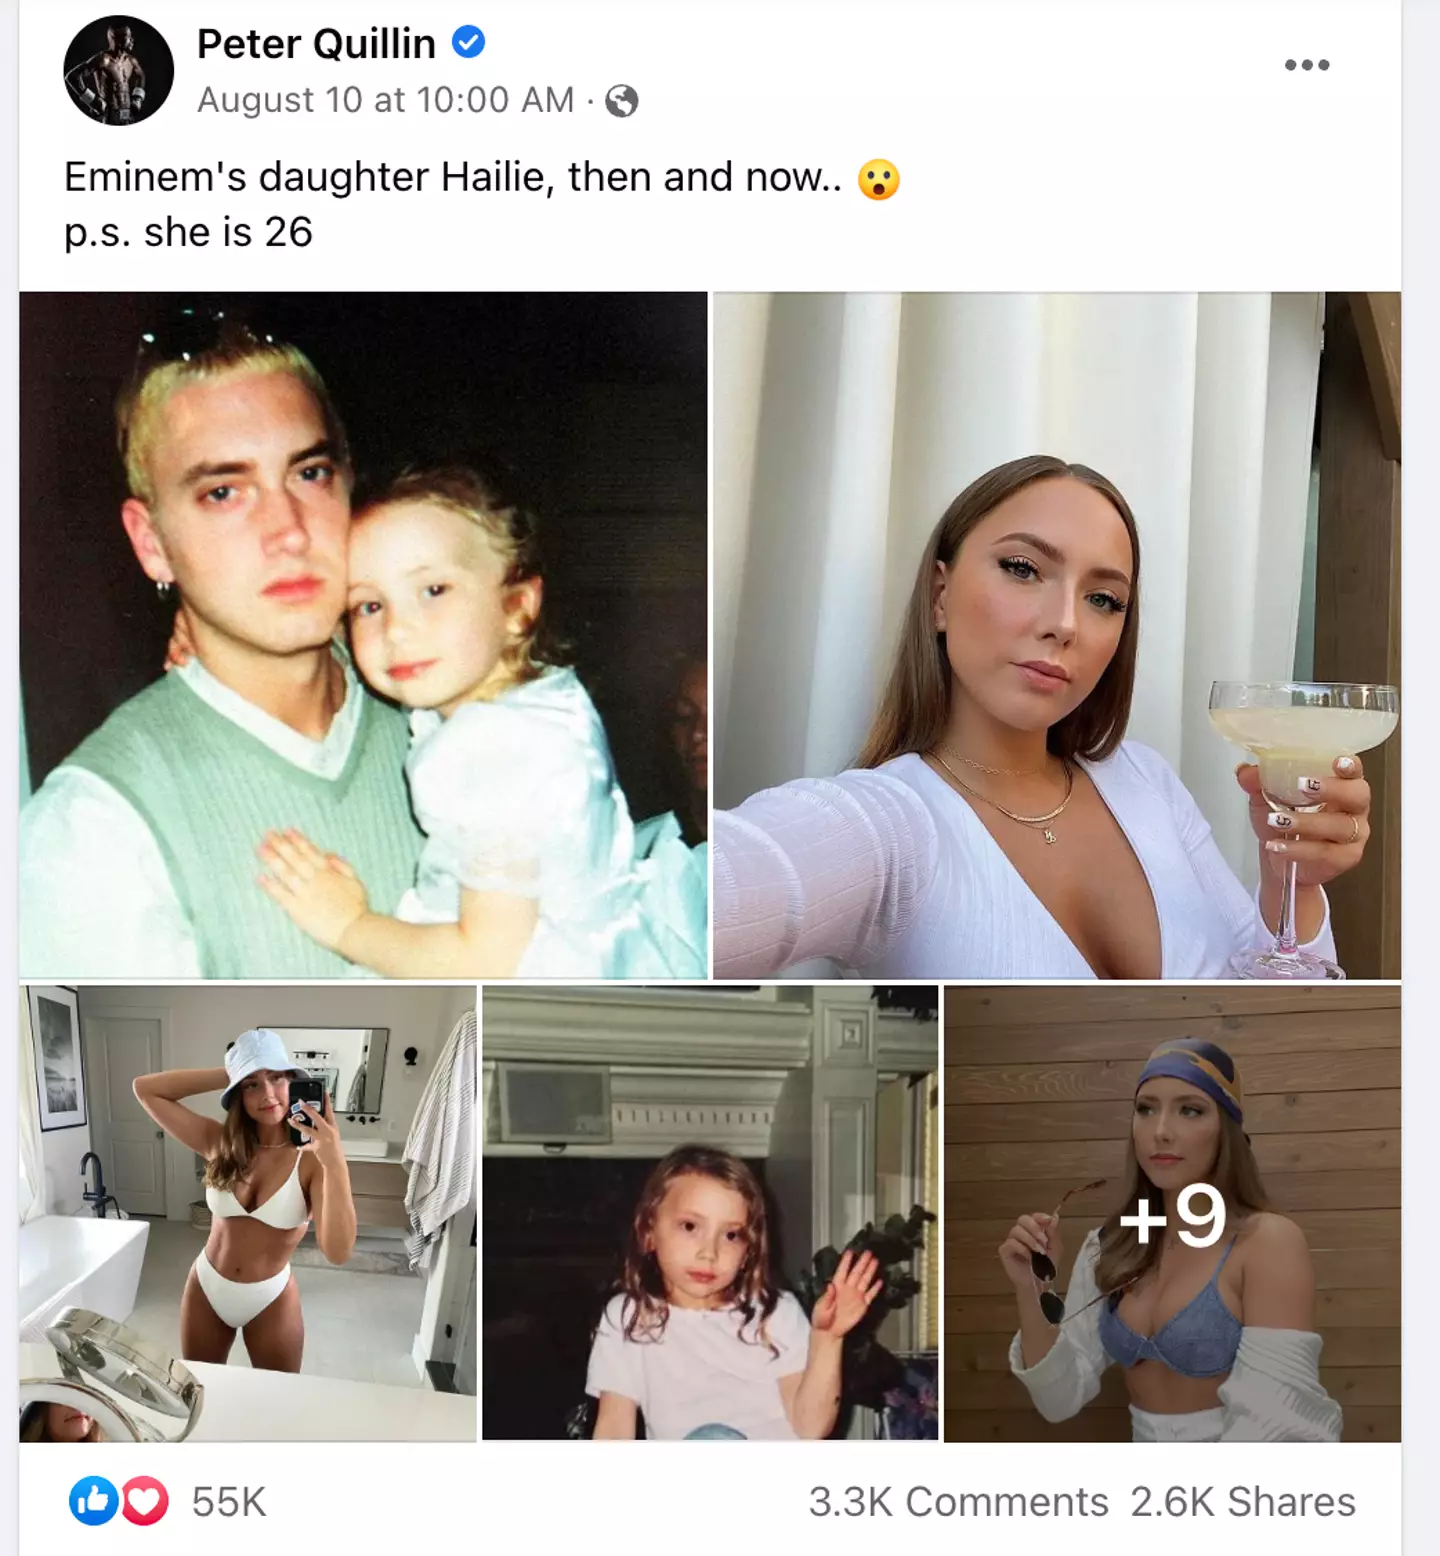 The Game commented on pictures of Hailie shared on Facebook.